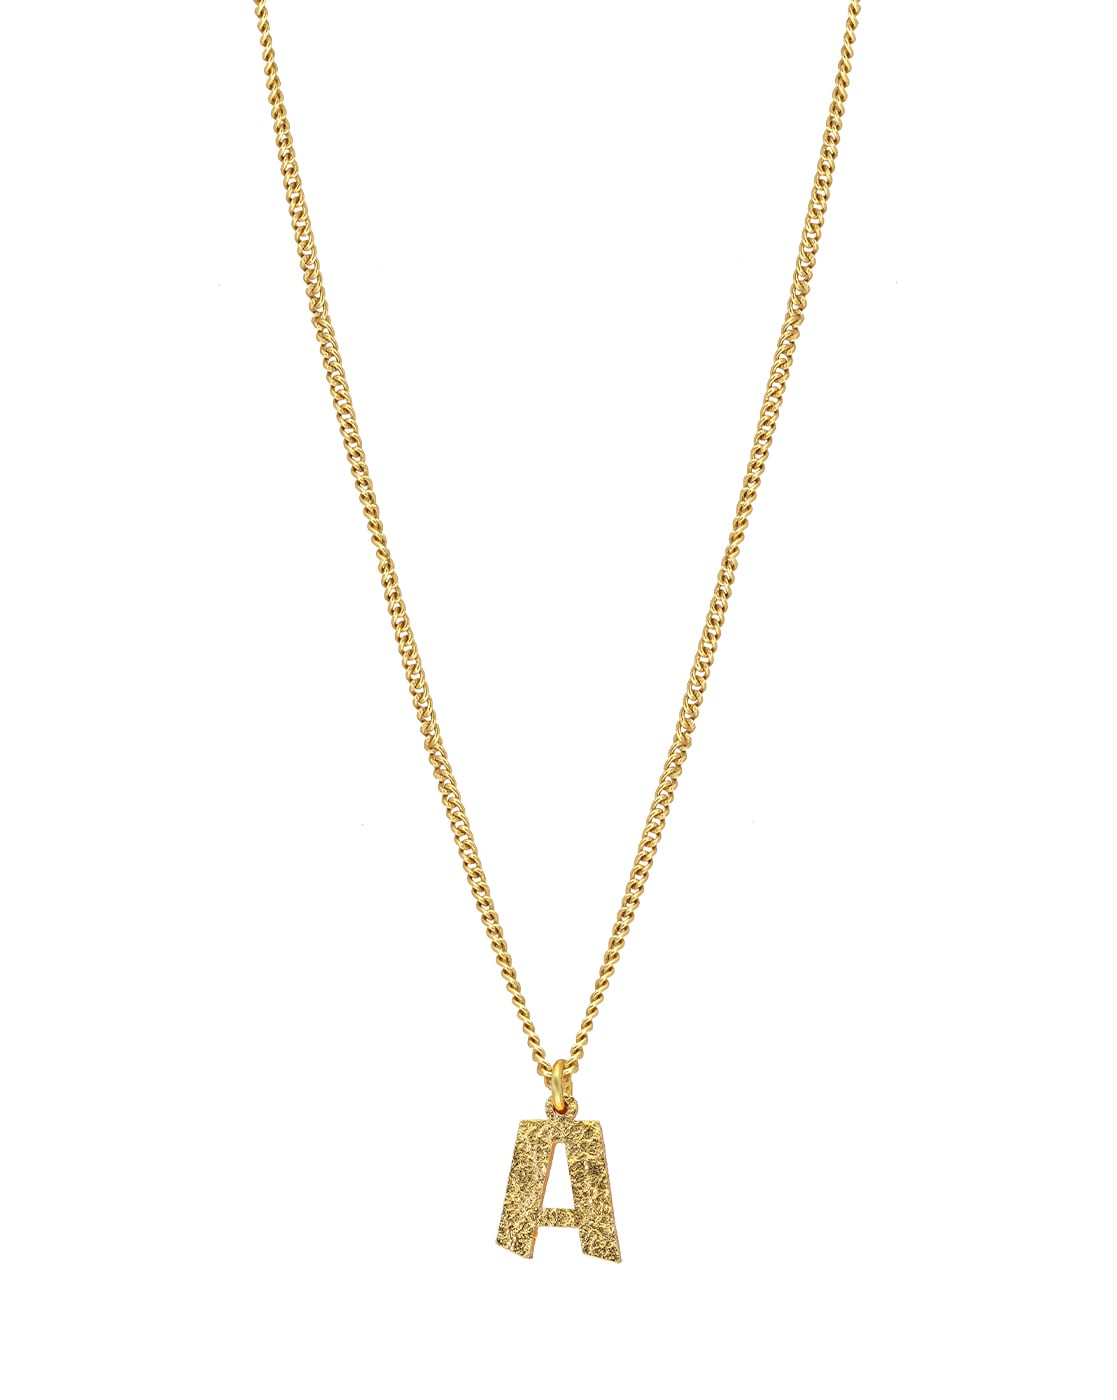 Amaal Jewellery Valentine Gifts Gold American Diamond Heart Alphabet Letter  'H' Necklace Pendant for Women Girls Girlfriend Boys Men with Chain PS0402  : Amazon.in: Fashion